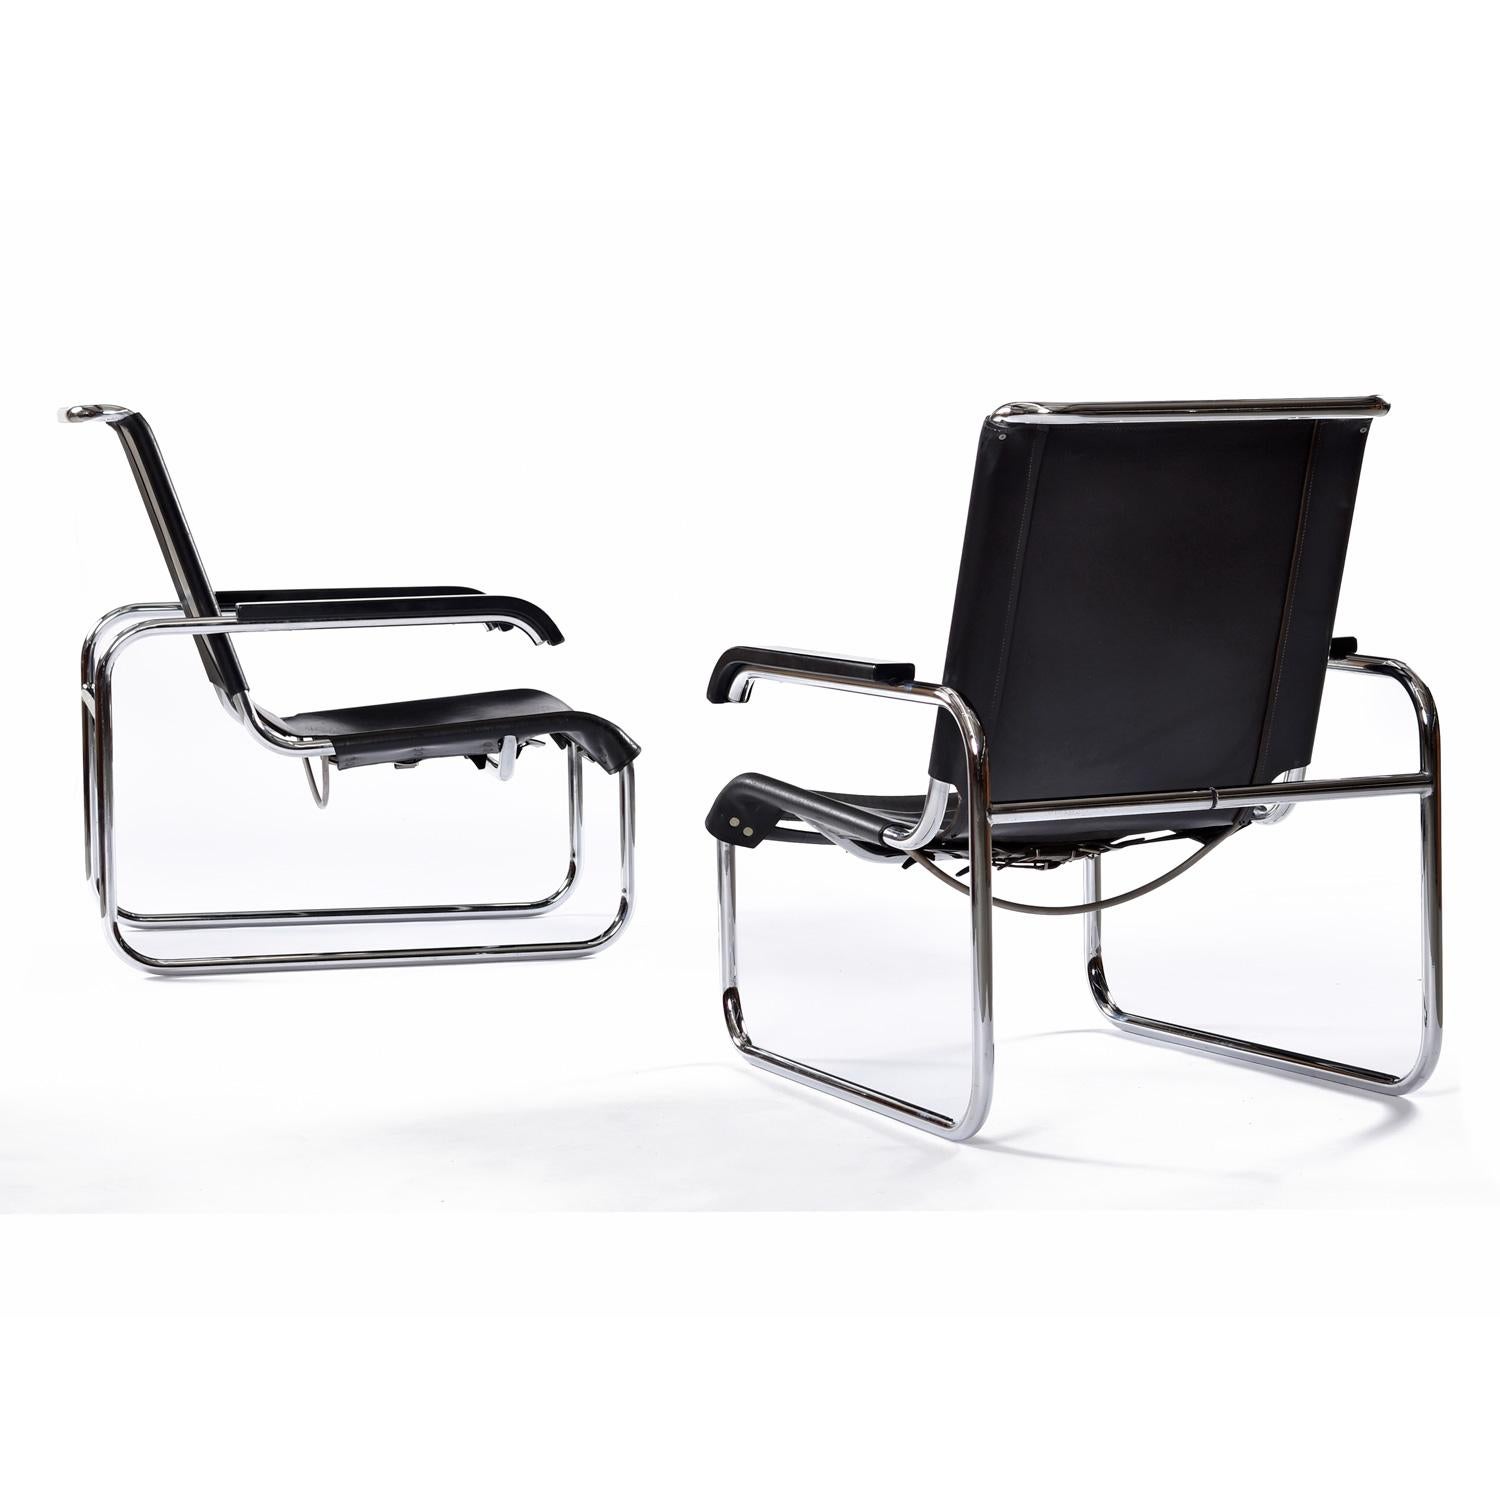 Allemand Marcel Breuer For Thonet B35 Cantilever Leather Sling Lounge Chairs Set of 2 en vente